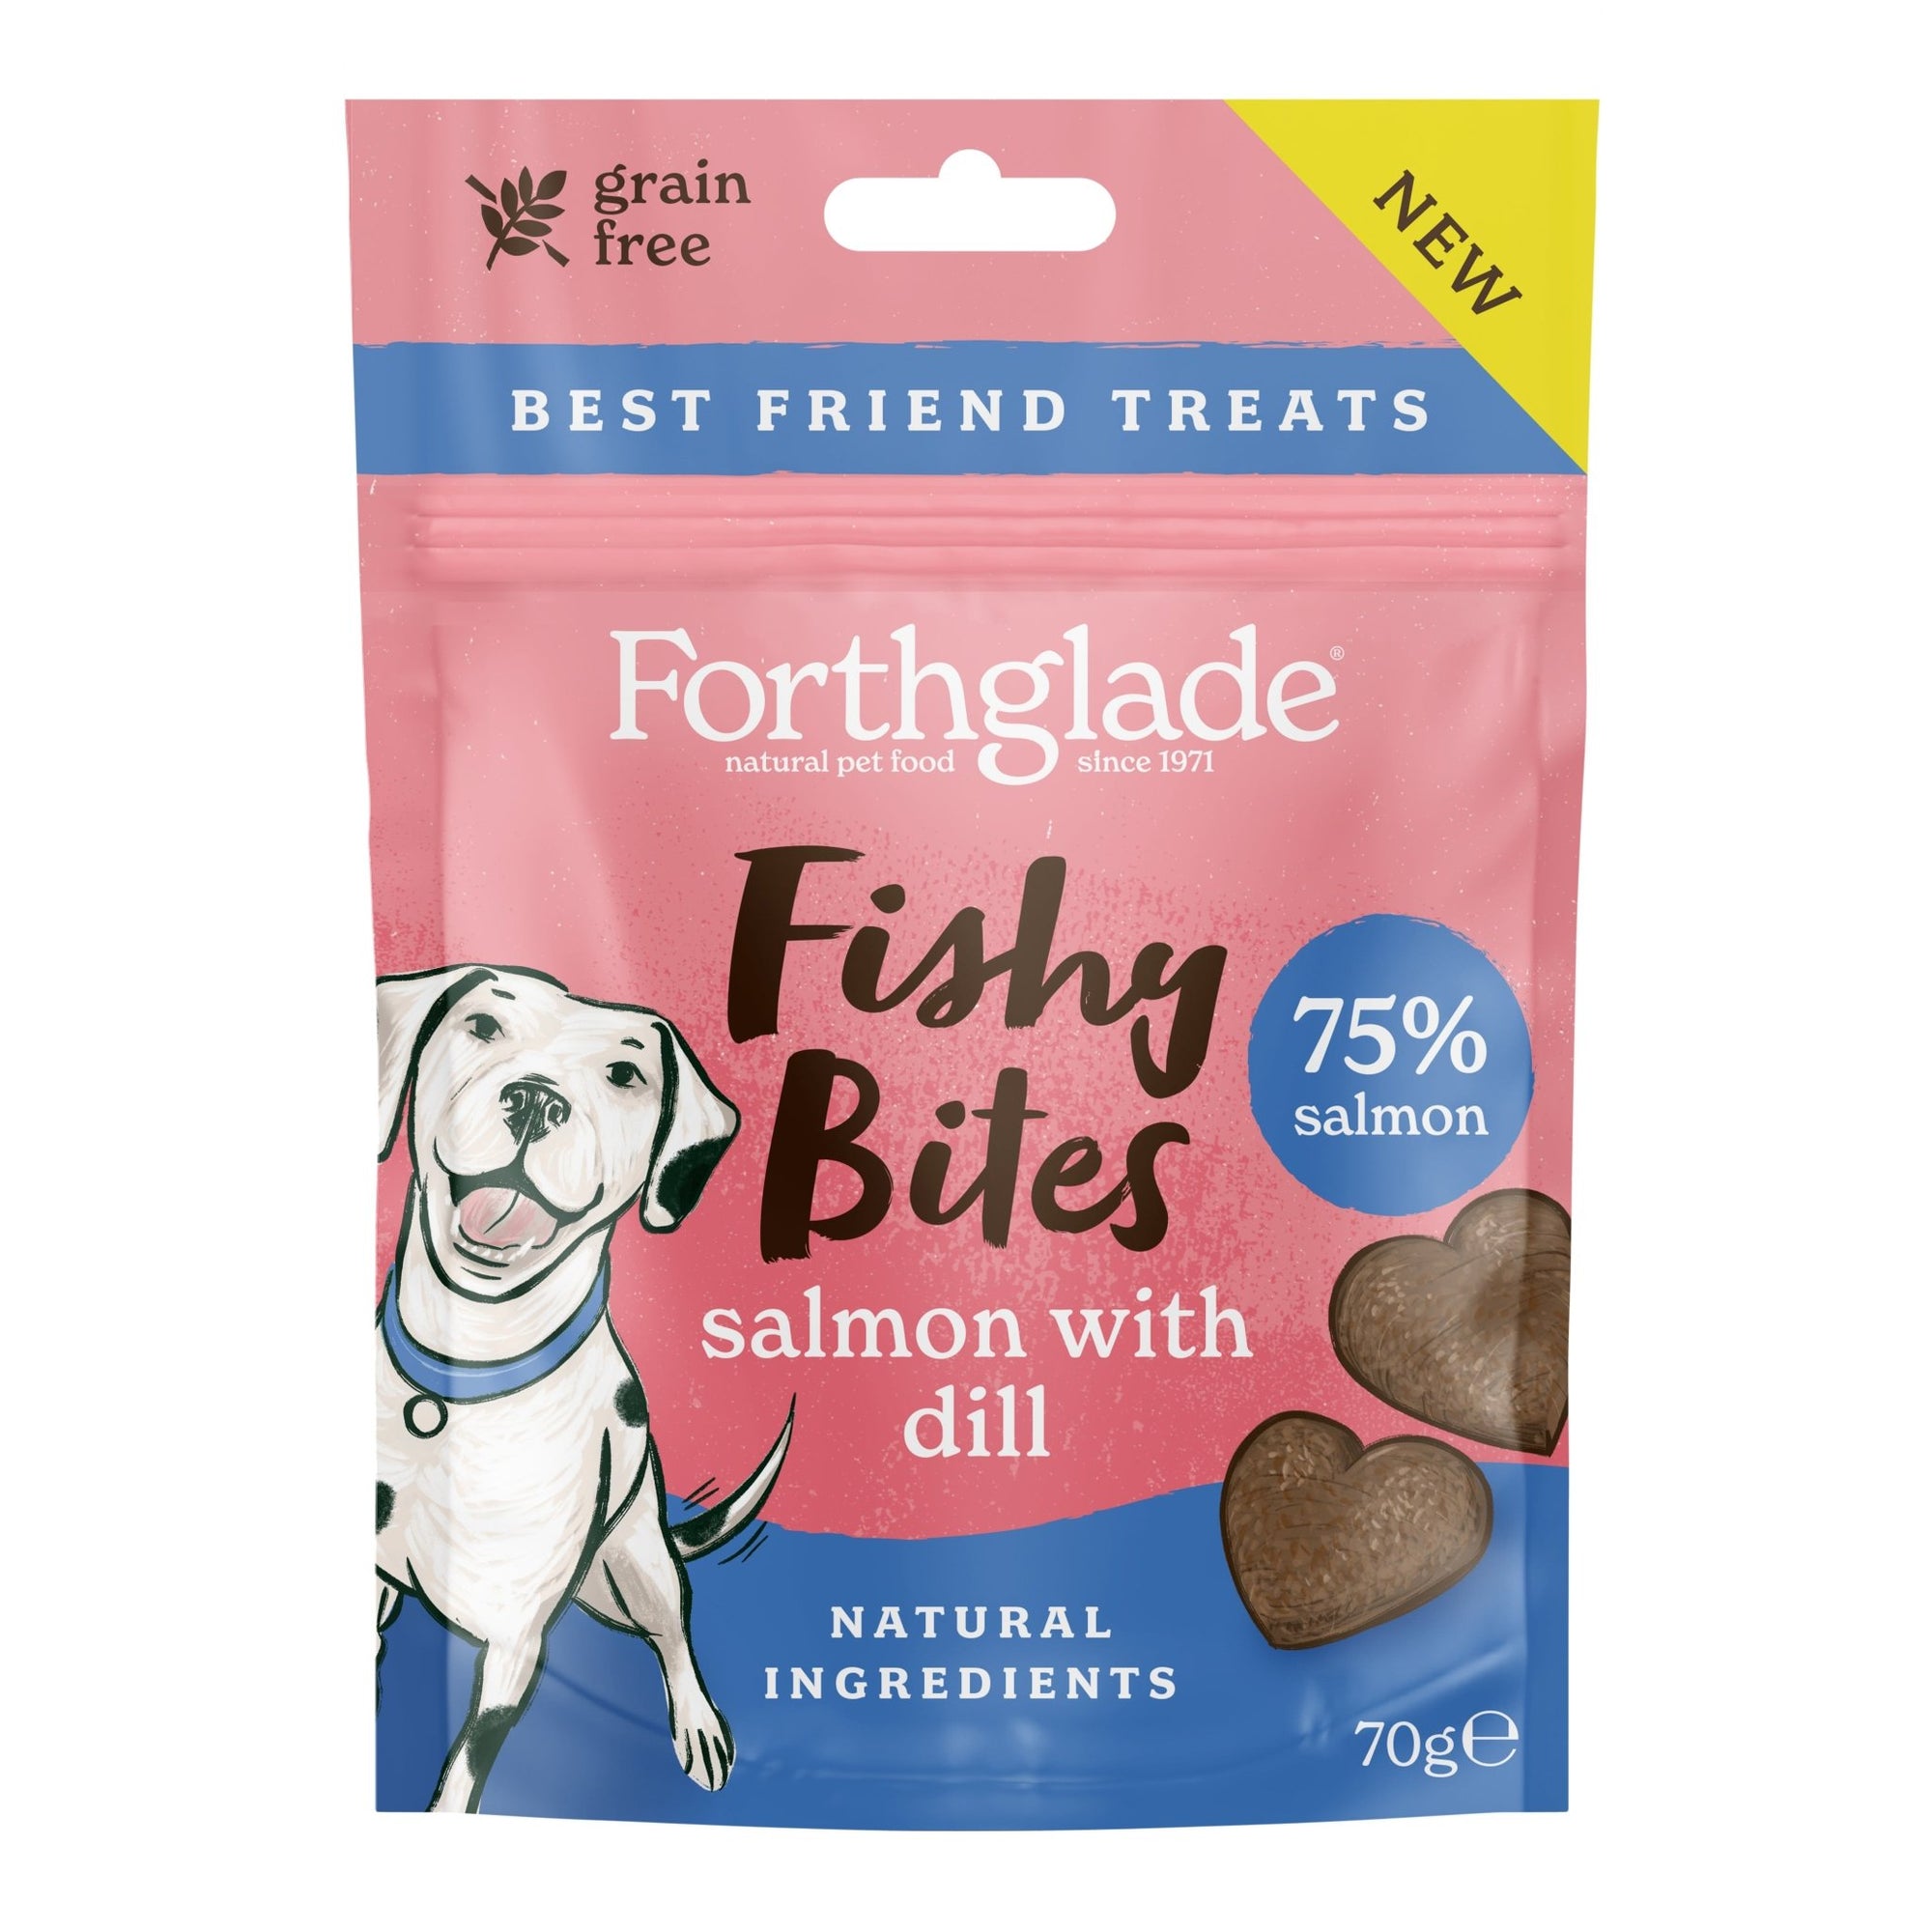 Forthglade Fishy Bites Grain Free Salmon with Dill Treats 10x70g, Forthglade,